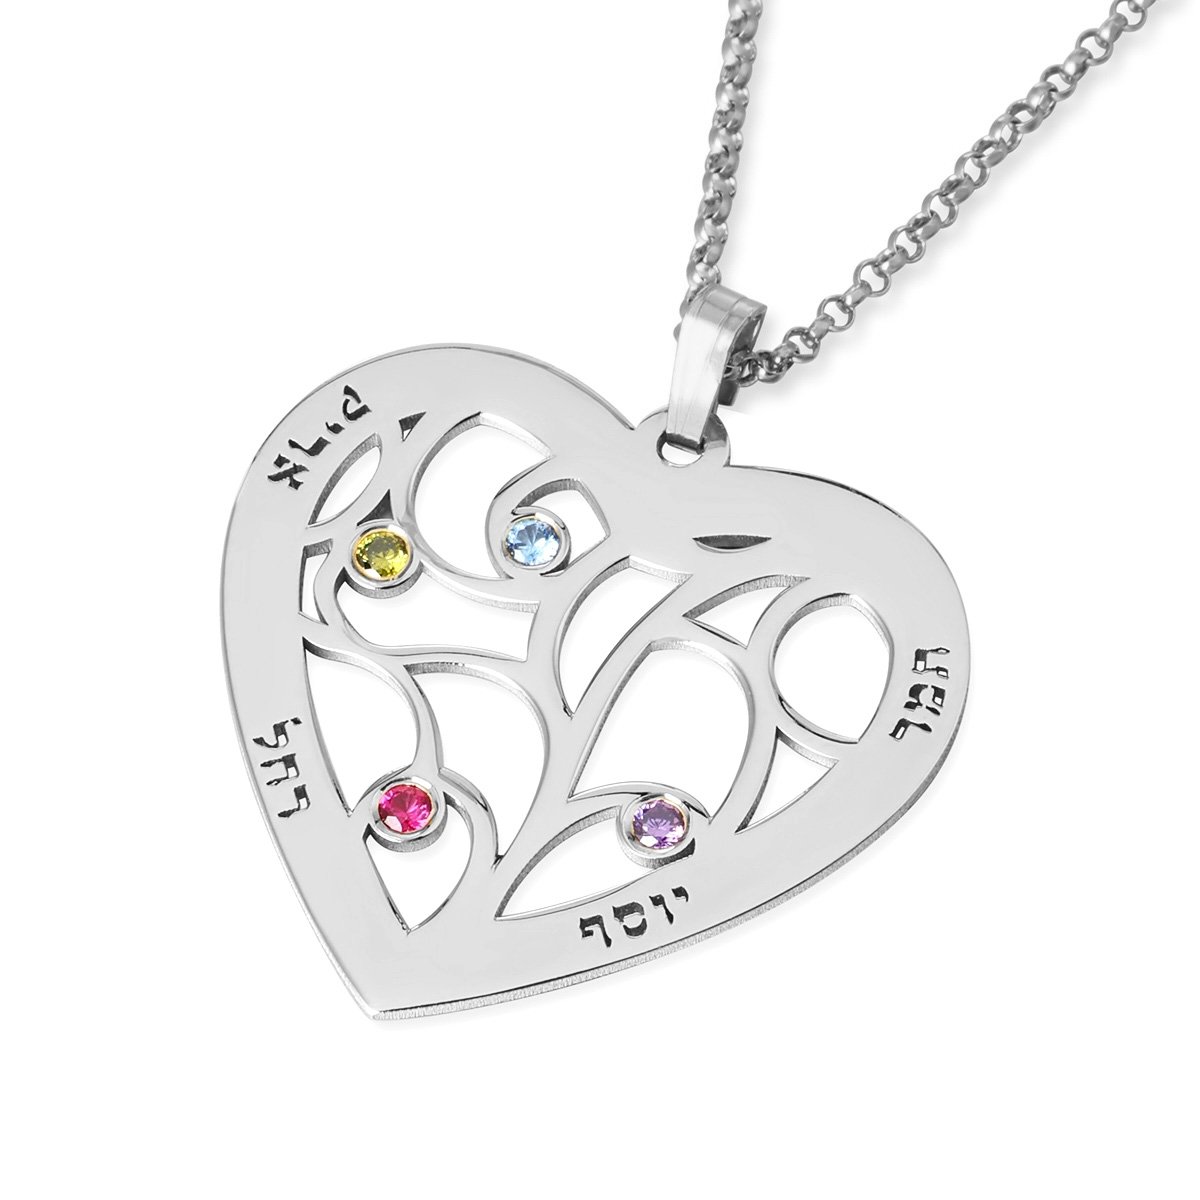 Hebrew/English Heart-Shaped Name Necklace With Family Tree Design And Birthstones - 1